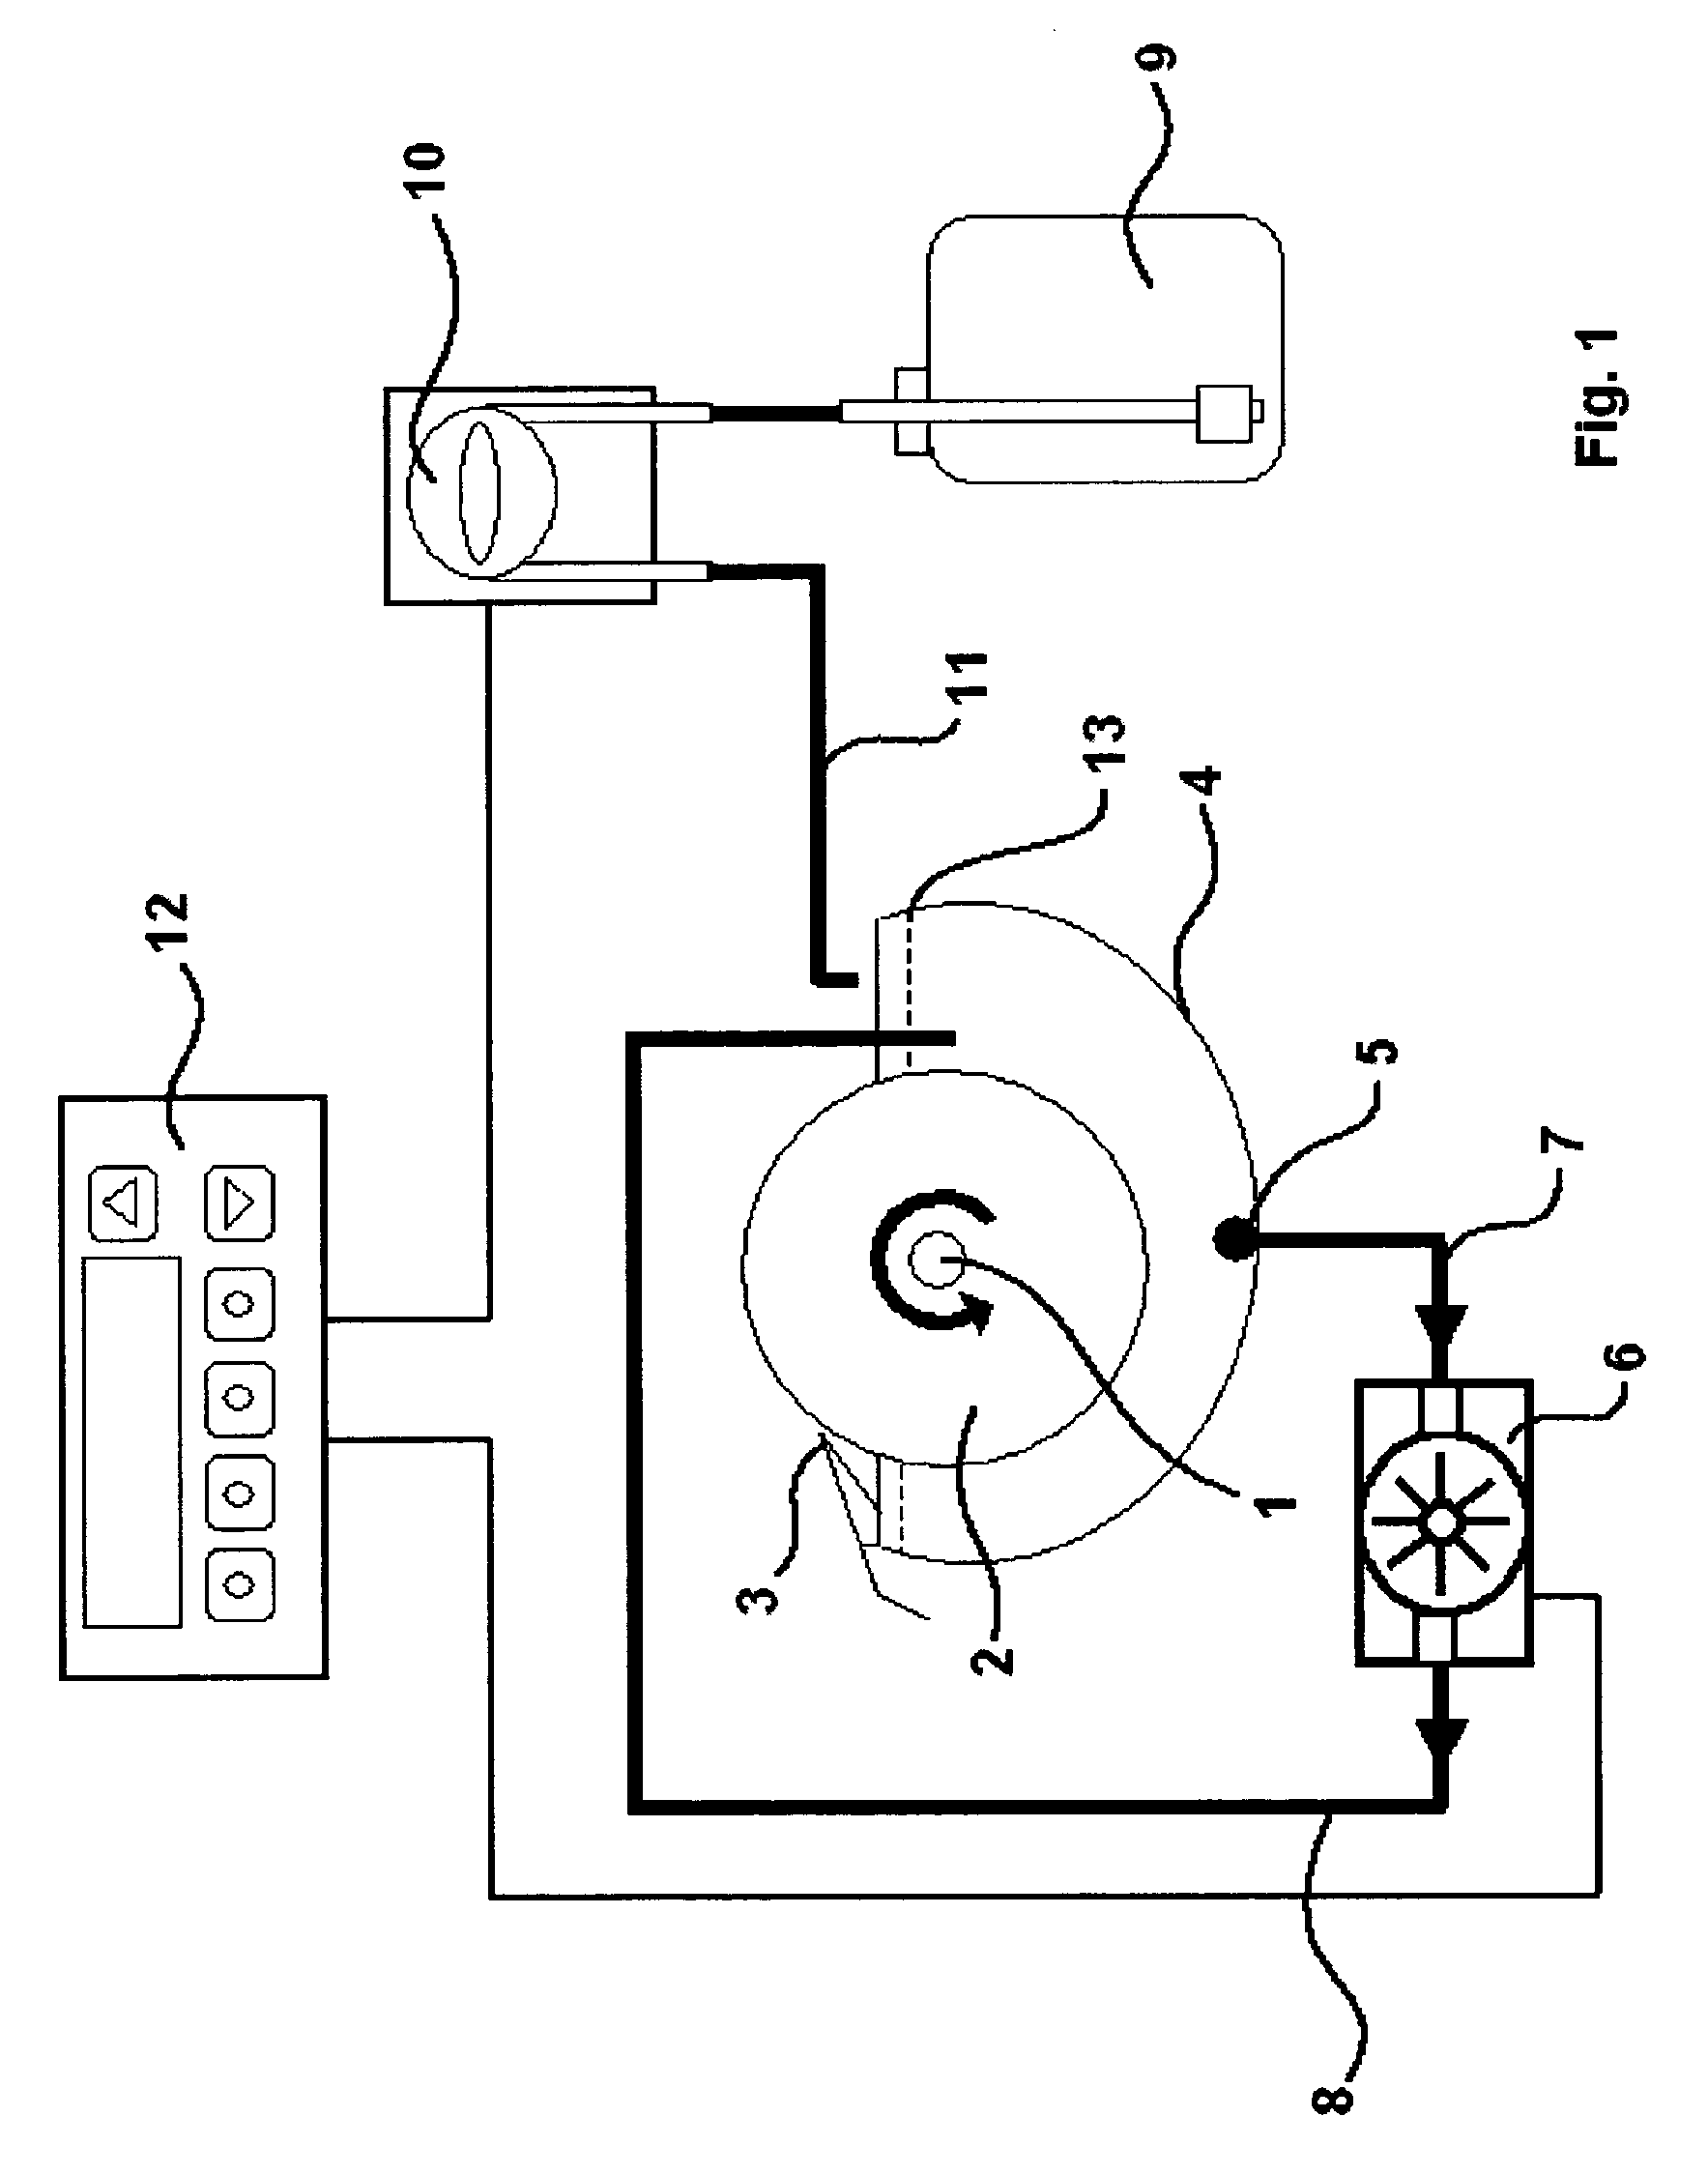 Apparatus for Producing Flake Ice and Method for Cleaning, Descaling and/or Disinfecting an Apparatus for Producing Flake Ice